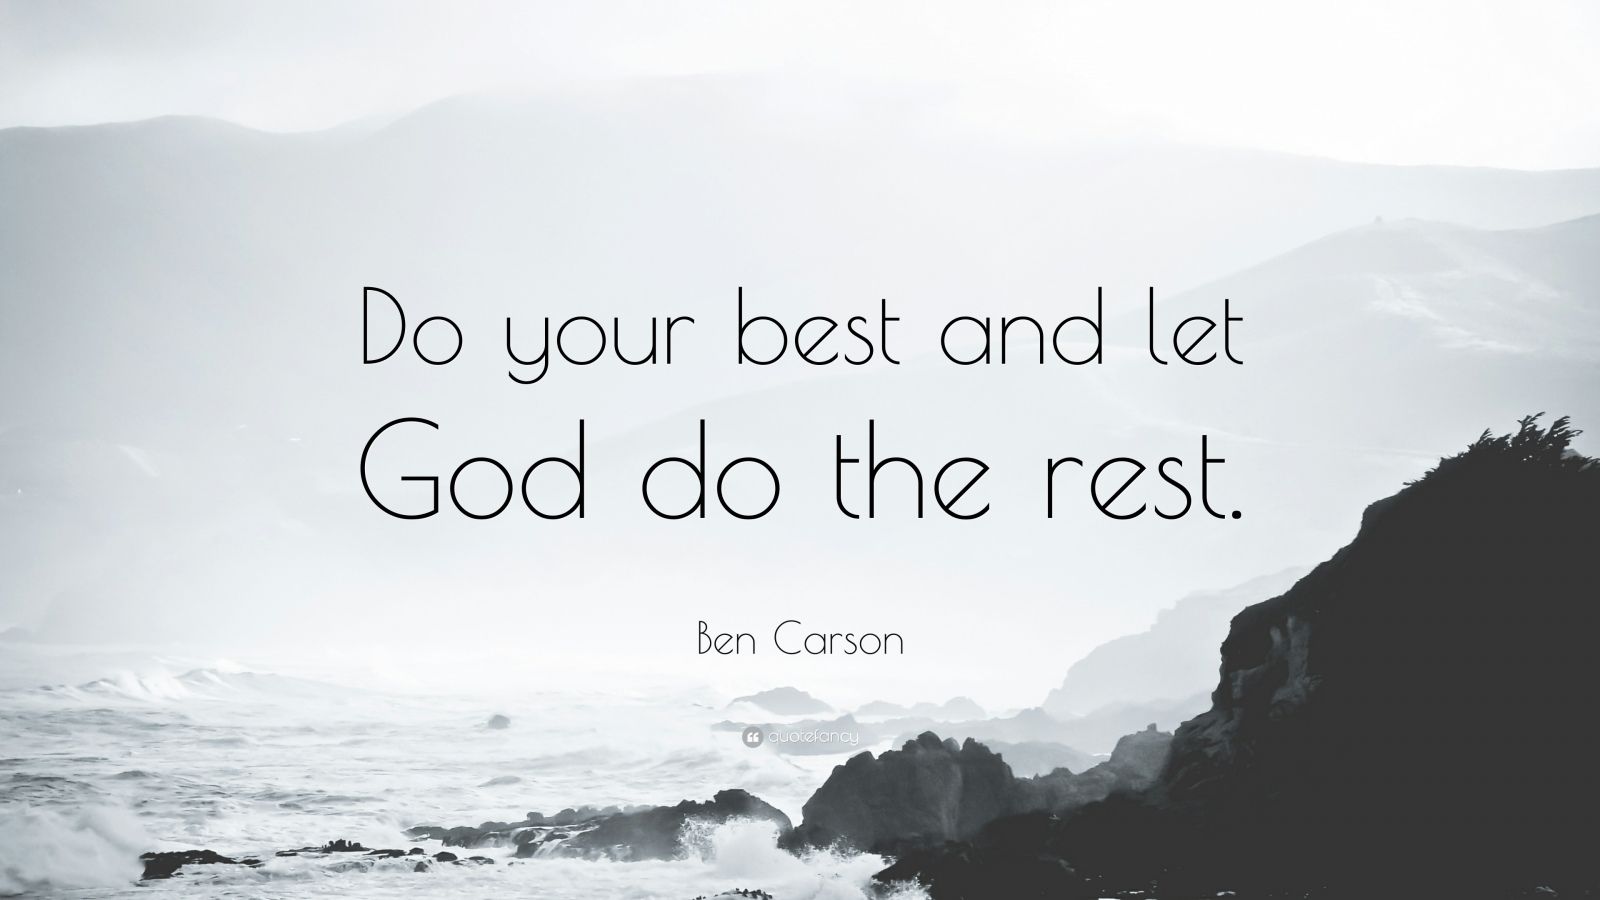 Ben Carson Quote: “Do your best and let God do the rest.”